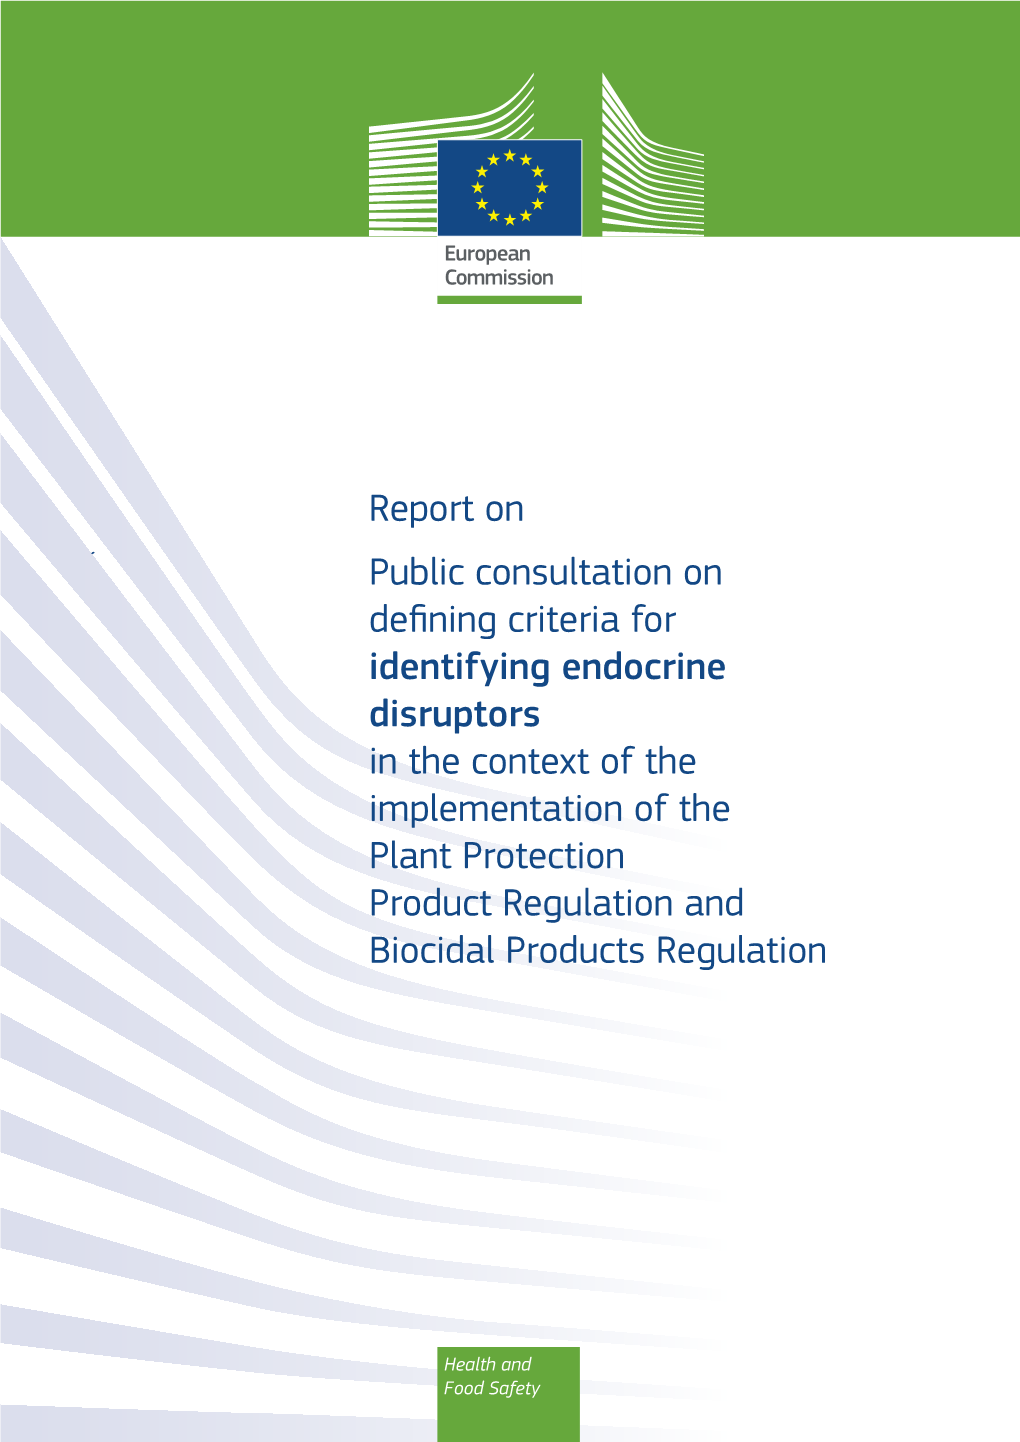 Report on Public Consultation on Defining Criteria for Identifying